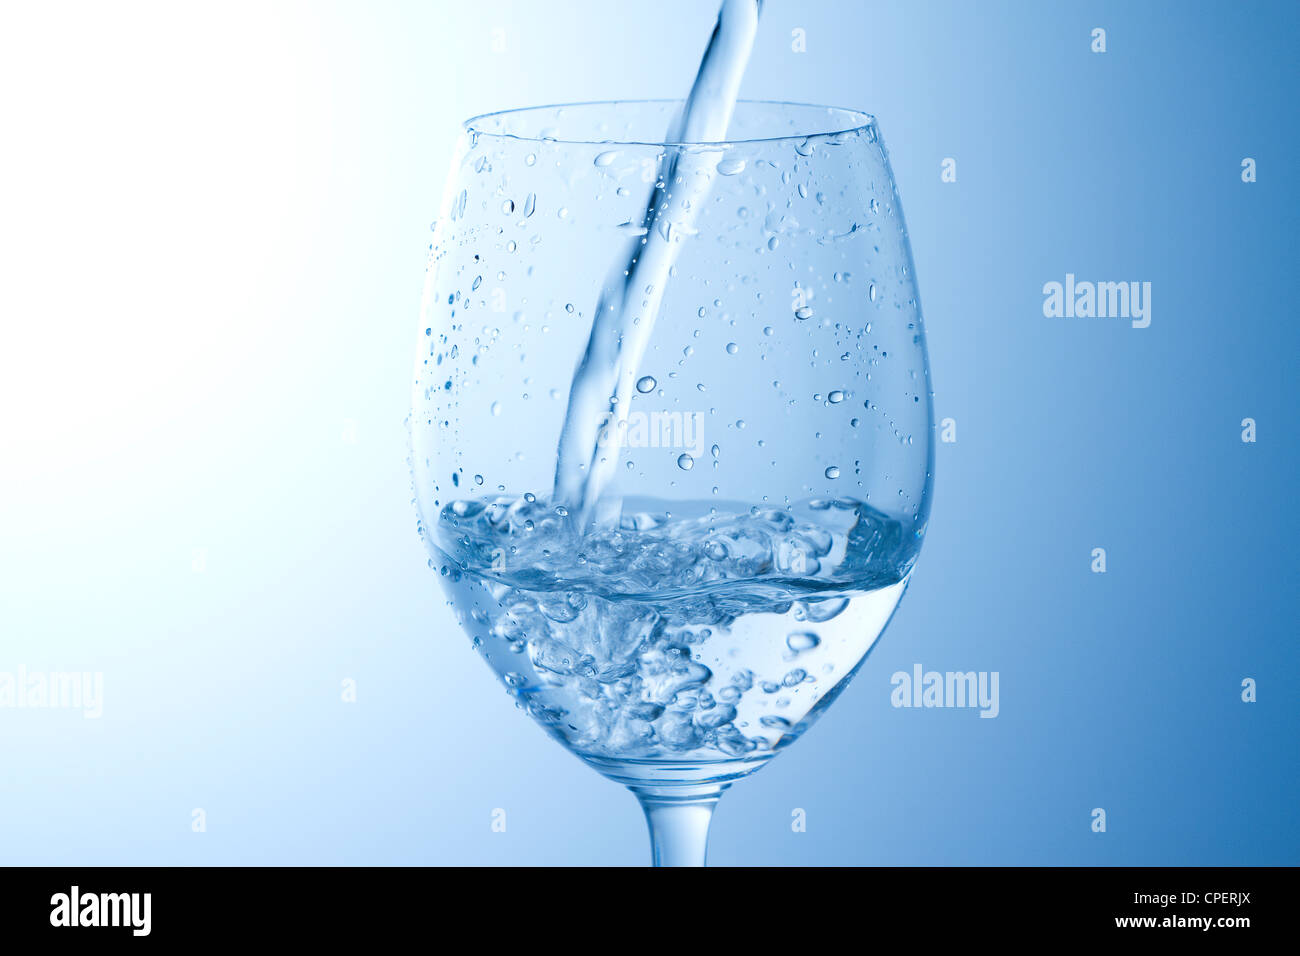 Water In Drinking Glass Stock Photo